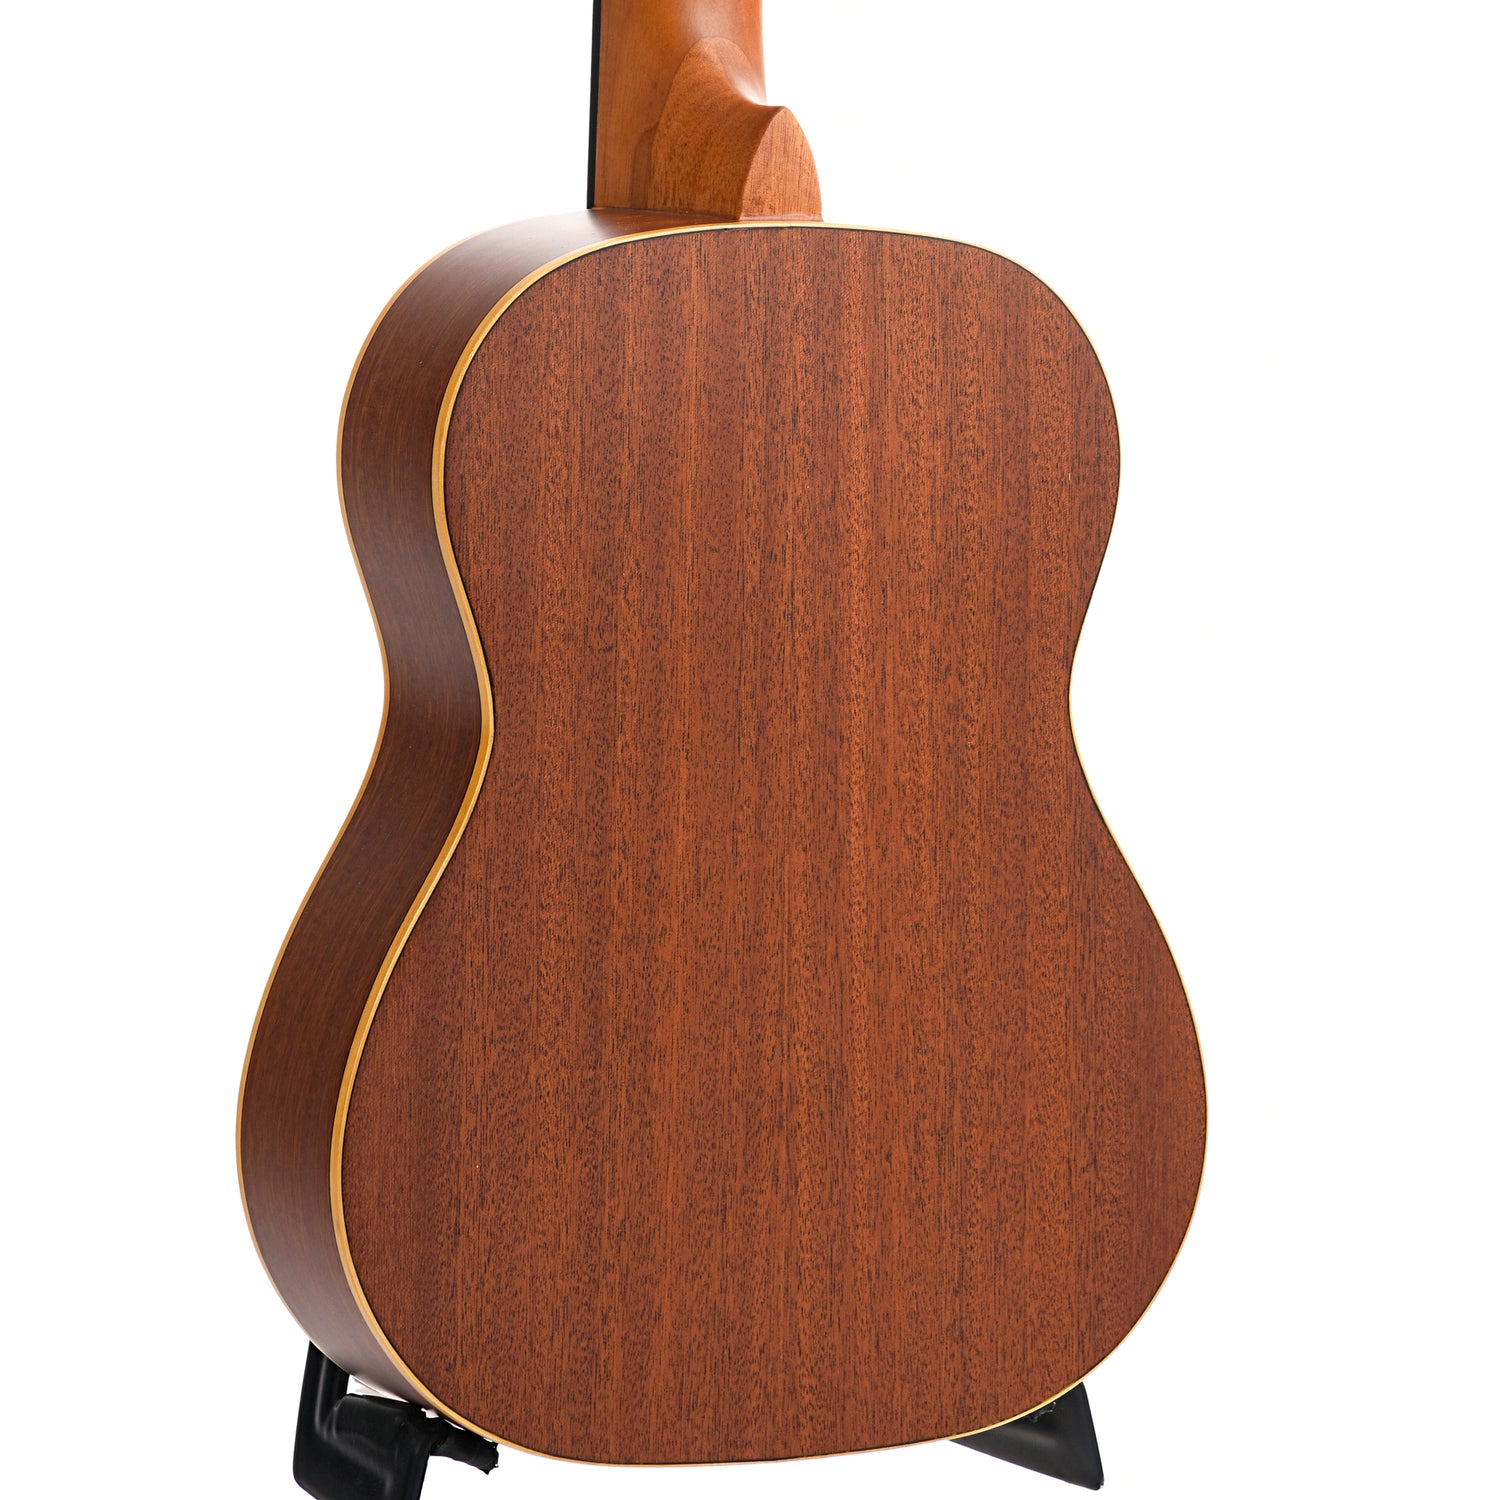 Image 12 of Ortega Family Series Pro R122-1/4 Classical Guitar, 1/4 size - SKU# R122-1/4 : Product Type Classical & Flamenco Guitars : Elderly Instruments